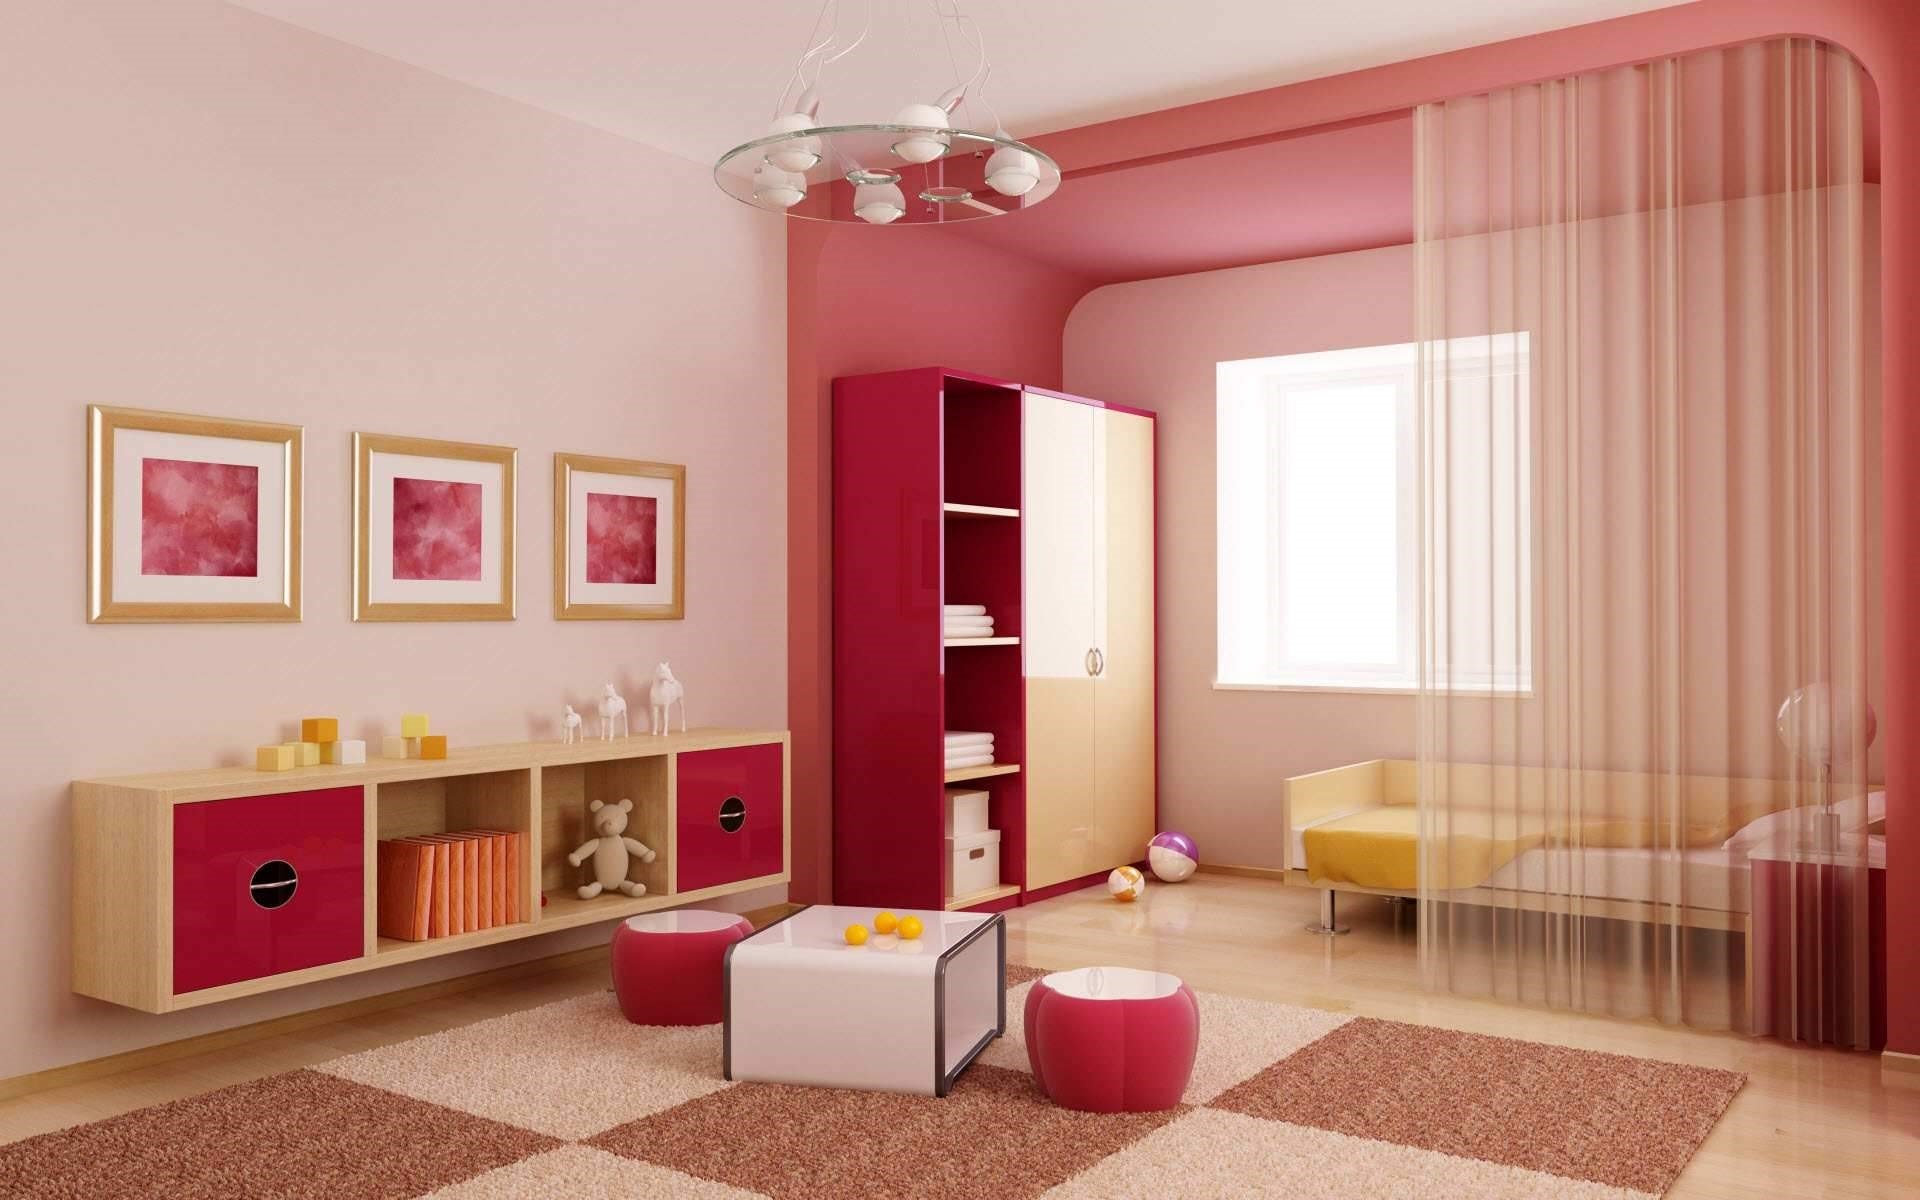 1920x1200 Bedroom Contemporary Astonishing Kids Room Style Pink Wallpaper Little Girls  Decor Ideas Decorating Apartments For Rent Twin